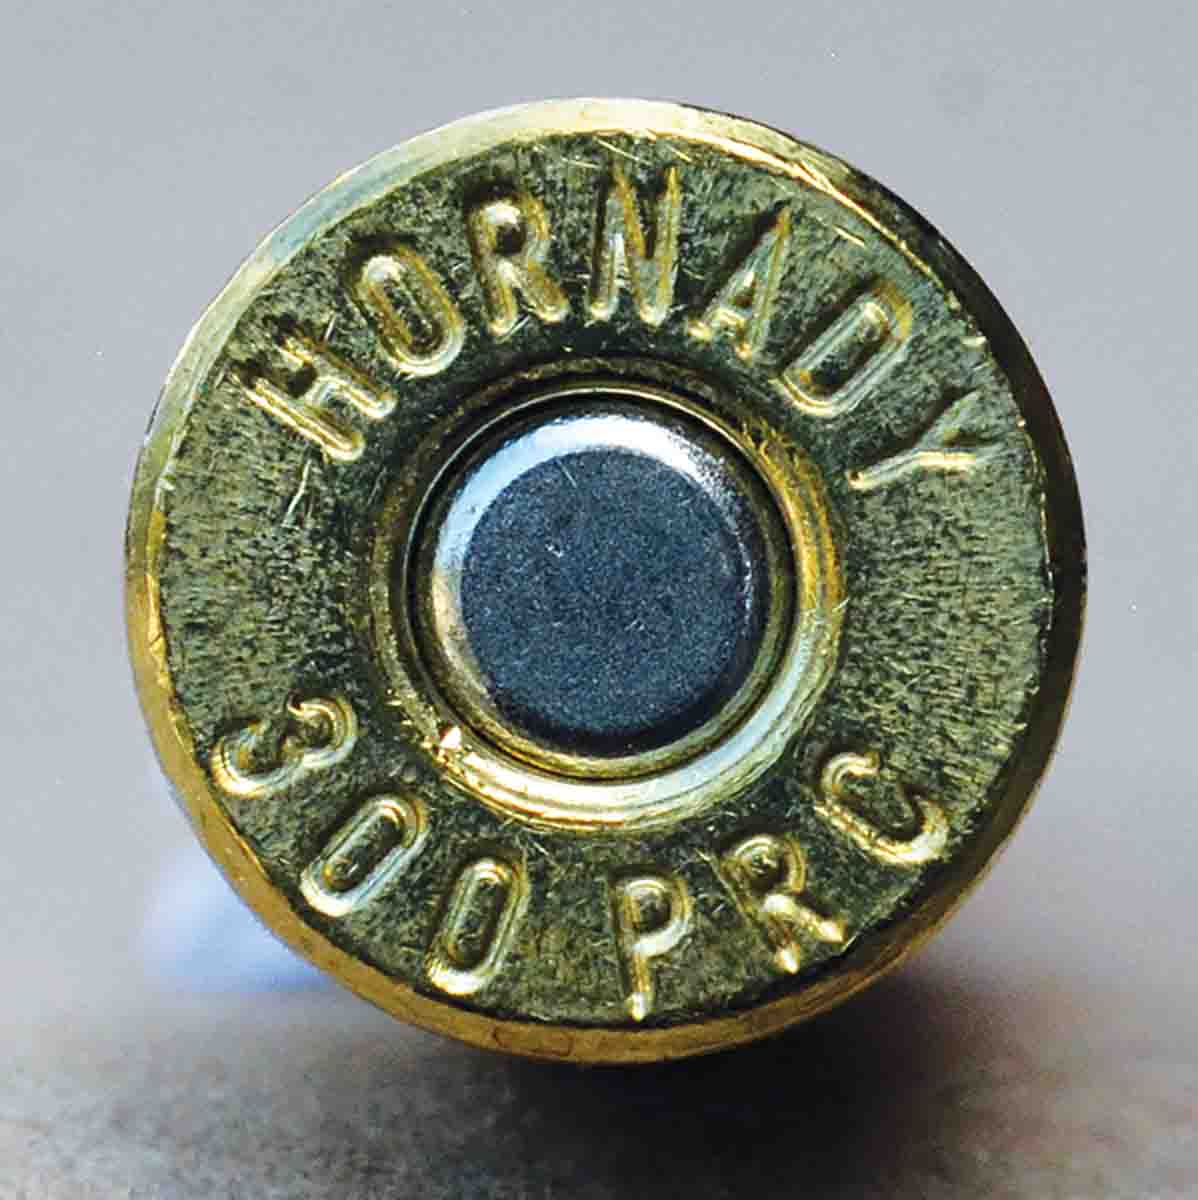 The .300 PRC was developed by Hornady Manufacturing as a modern long-range cartridge, based on the .375 Ruger beltless case.